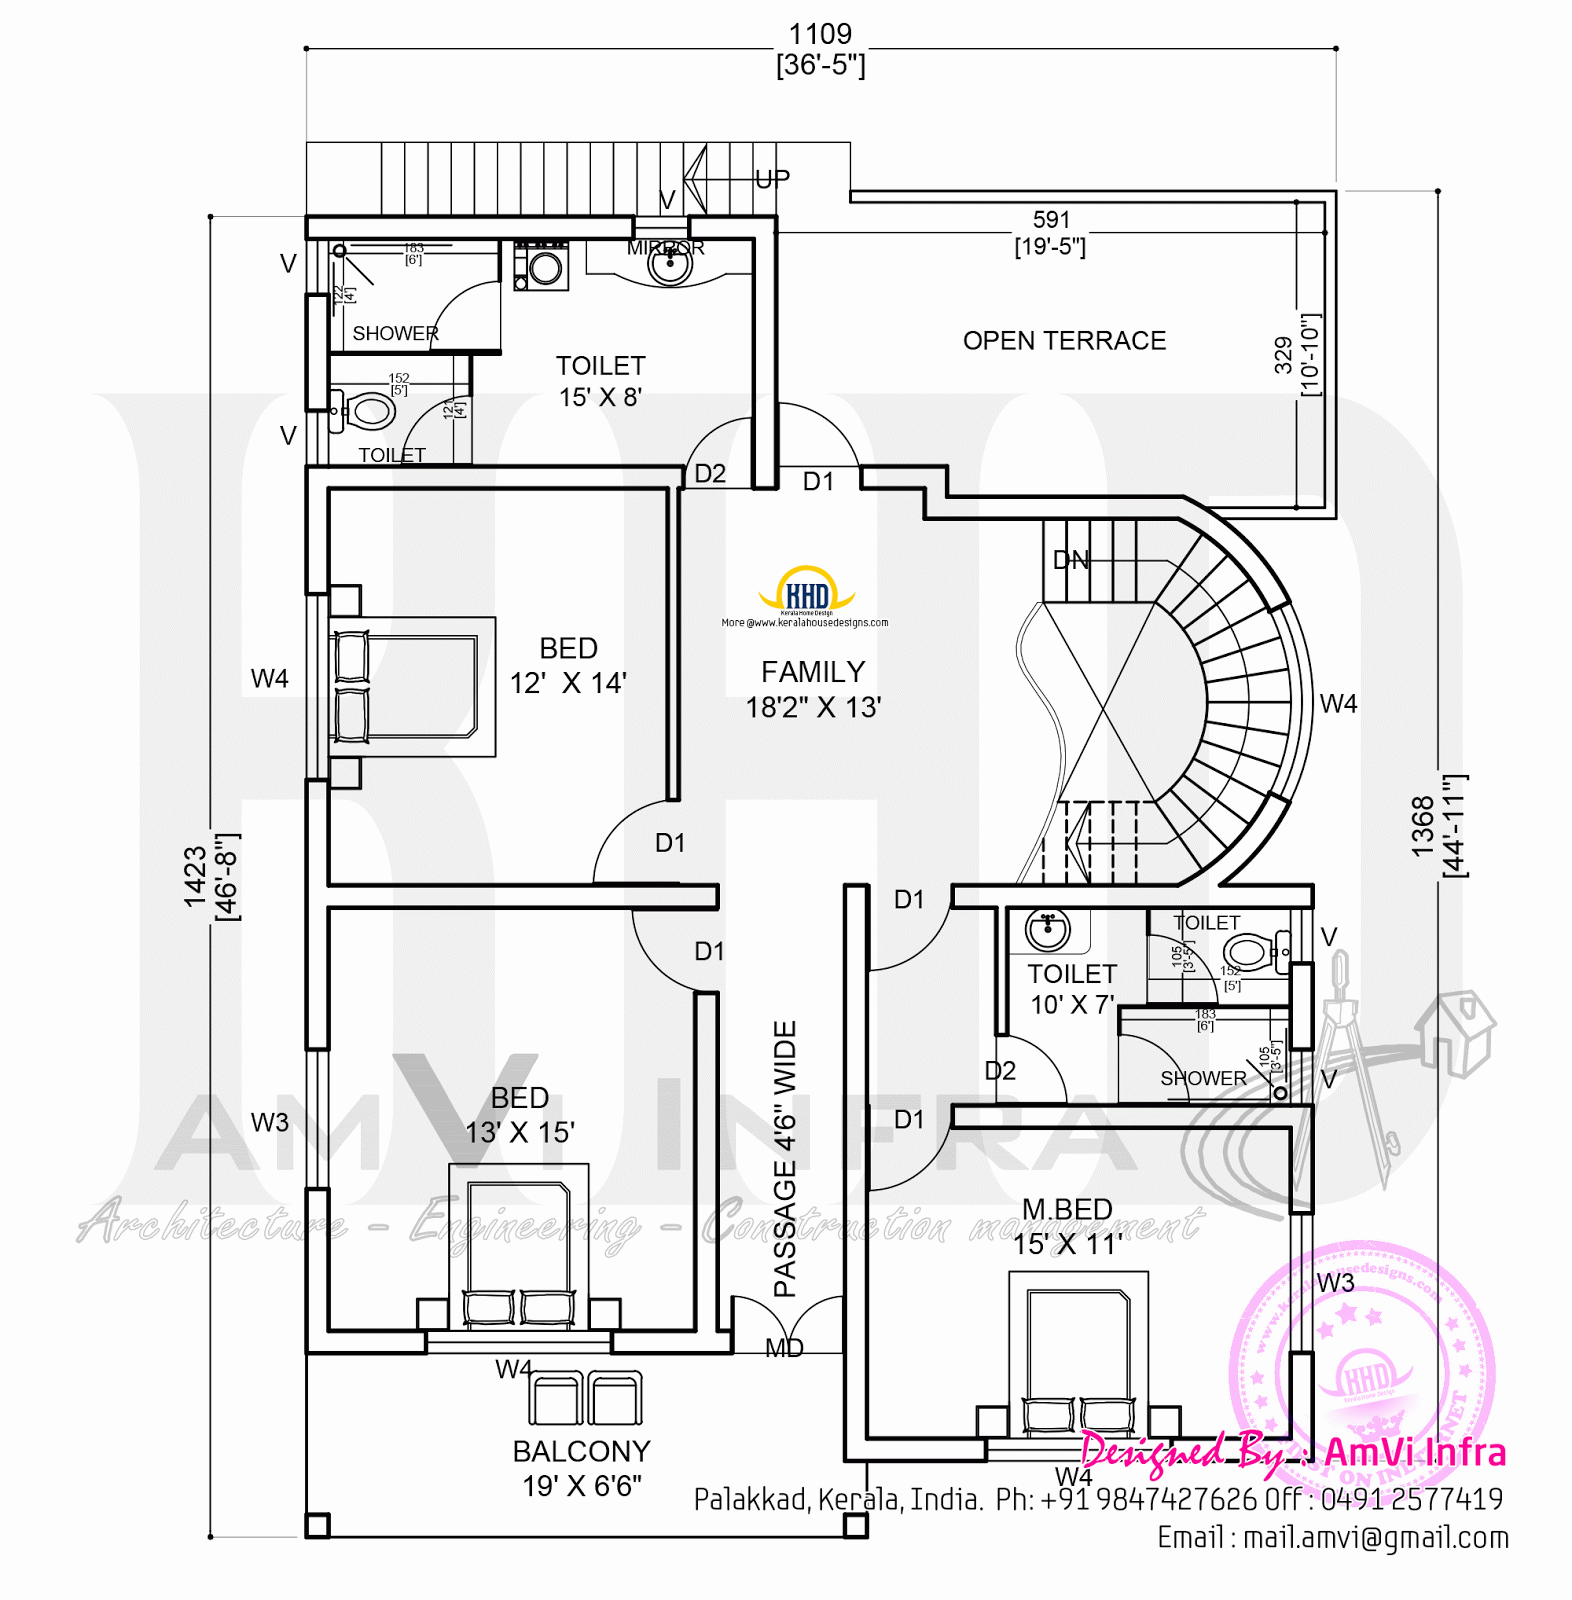 Elevation and free floor plan | Home Kerala Plans